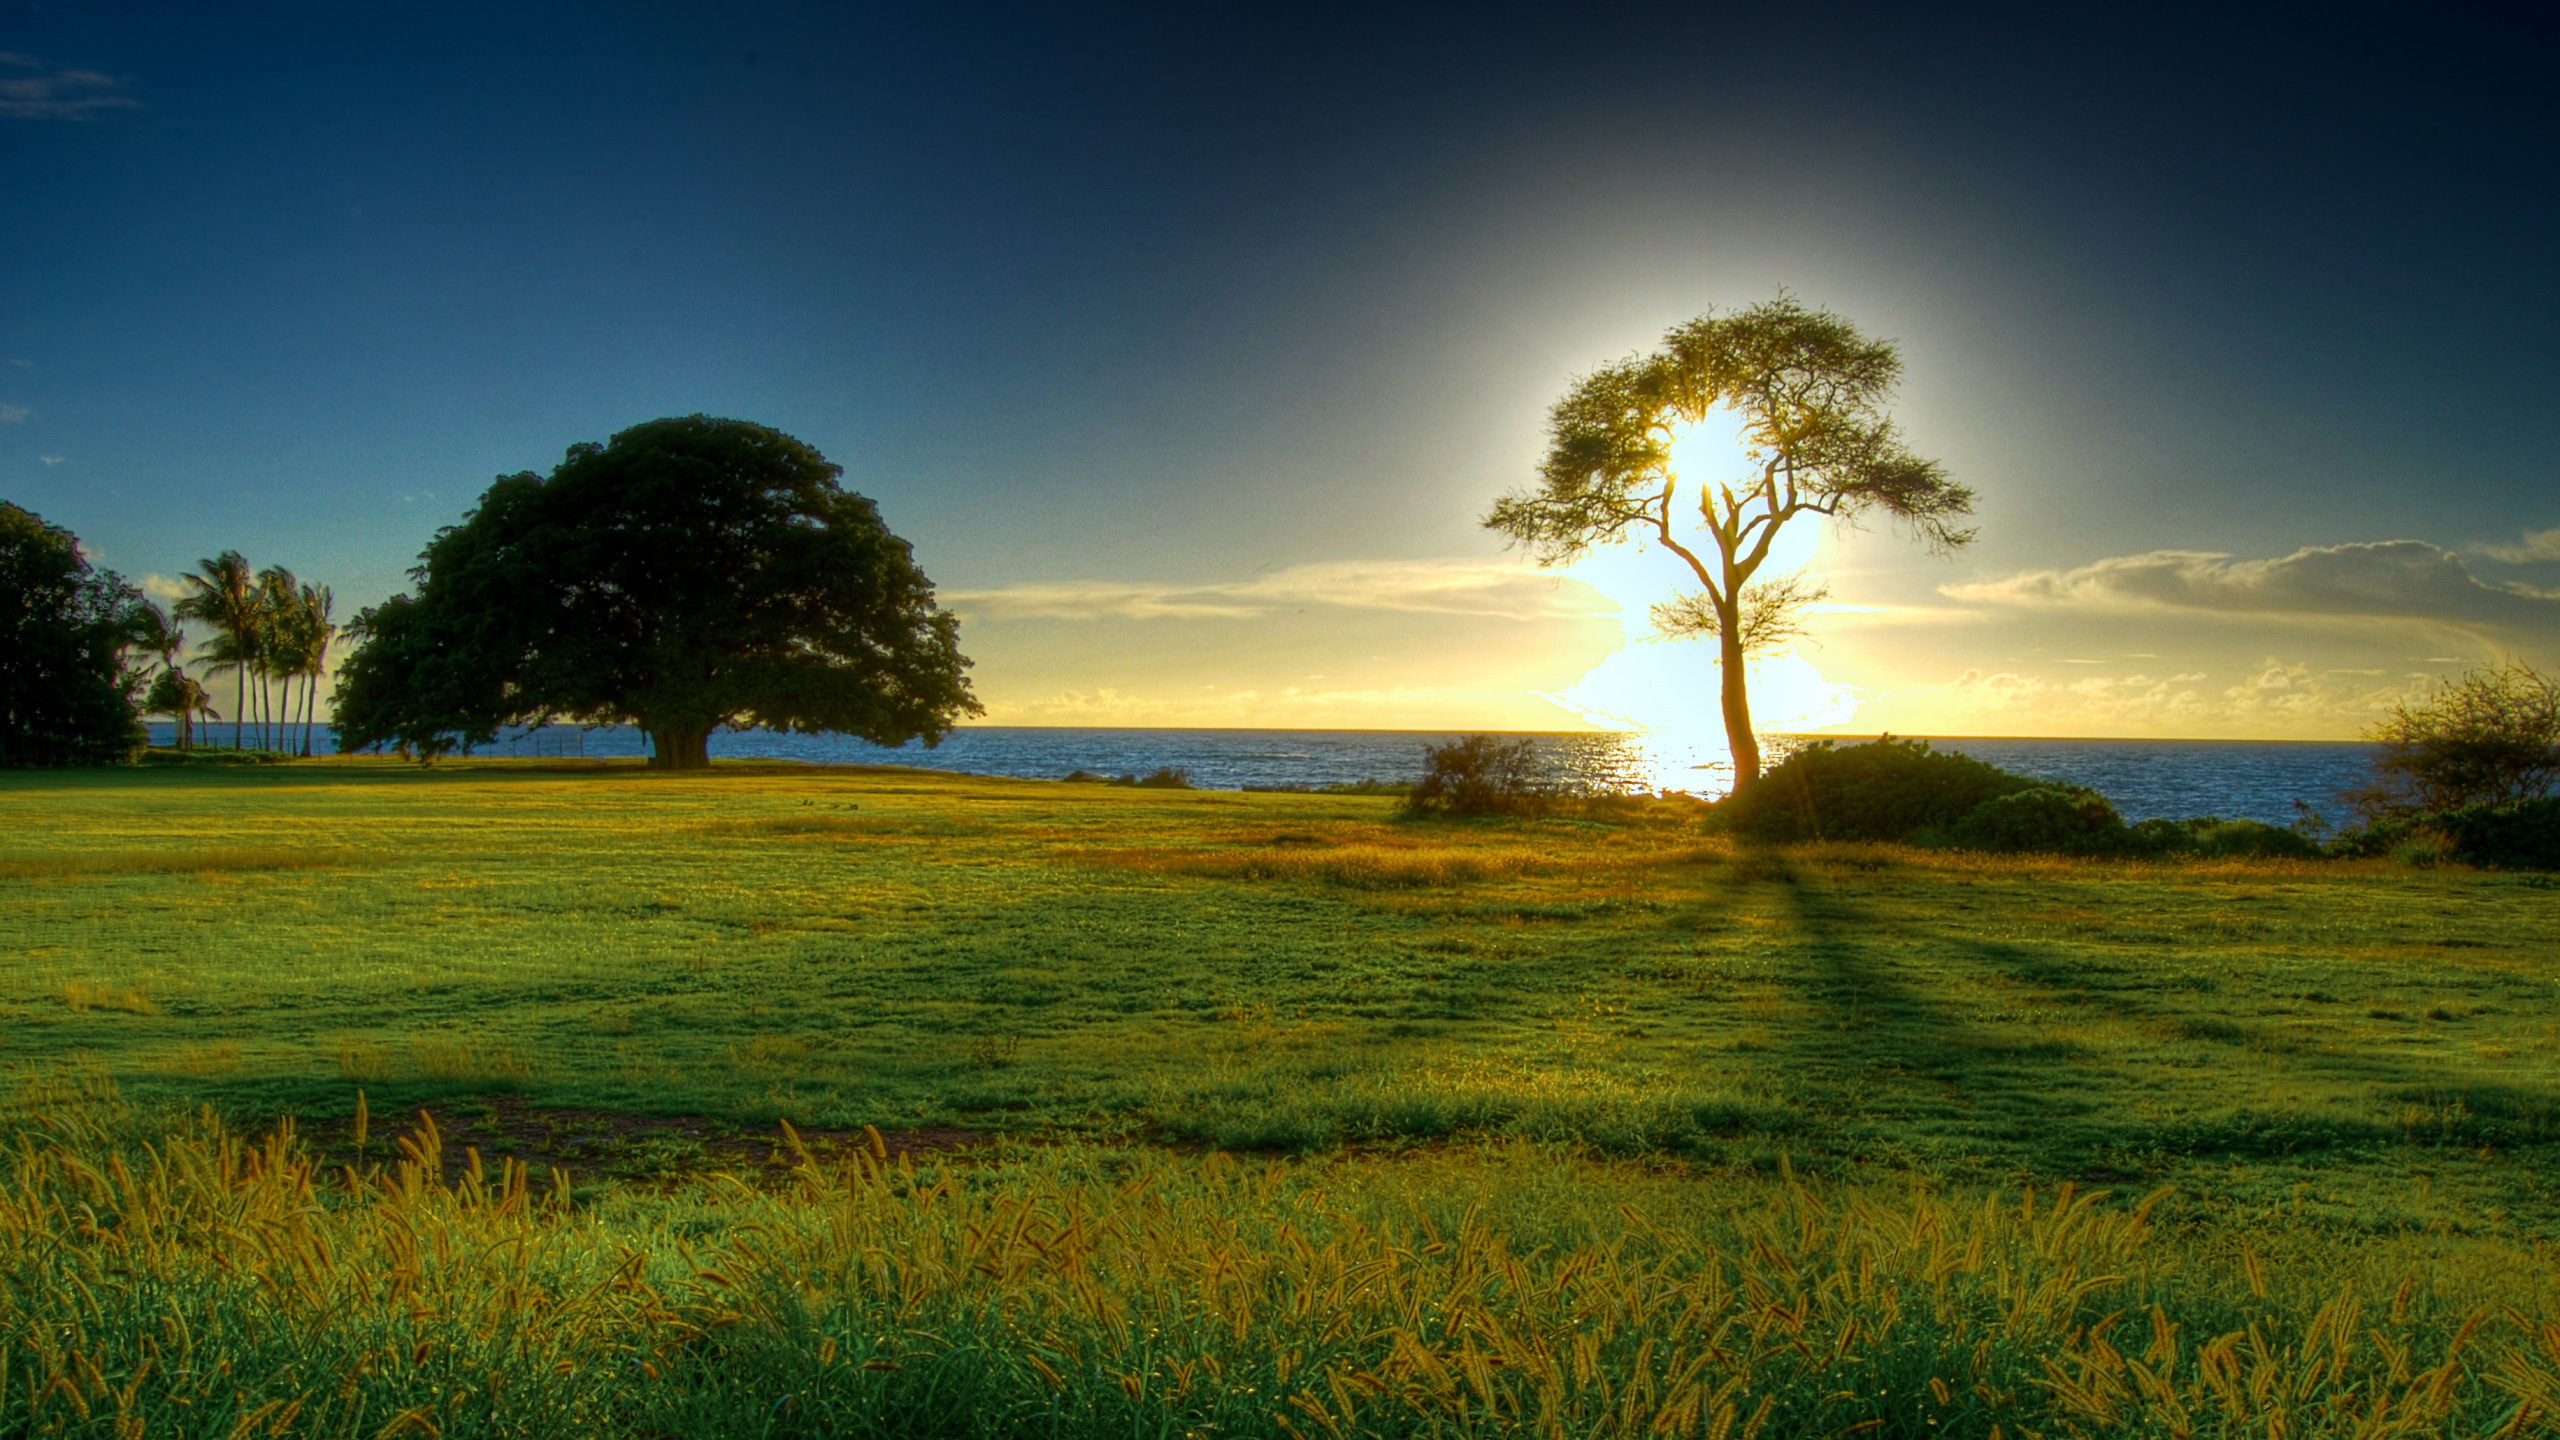 Green Grass Field Near Body of Water During Daytime. Wallpaper in 2560x1440 Resolution